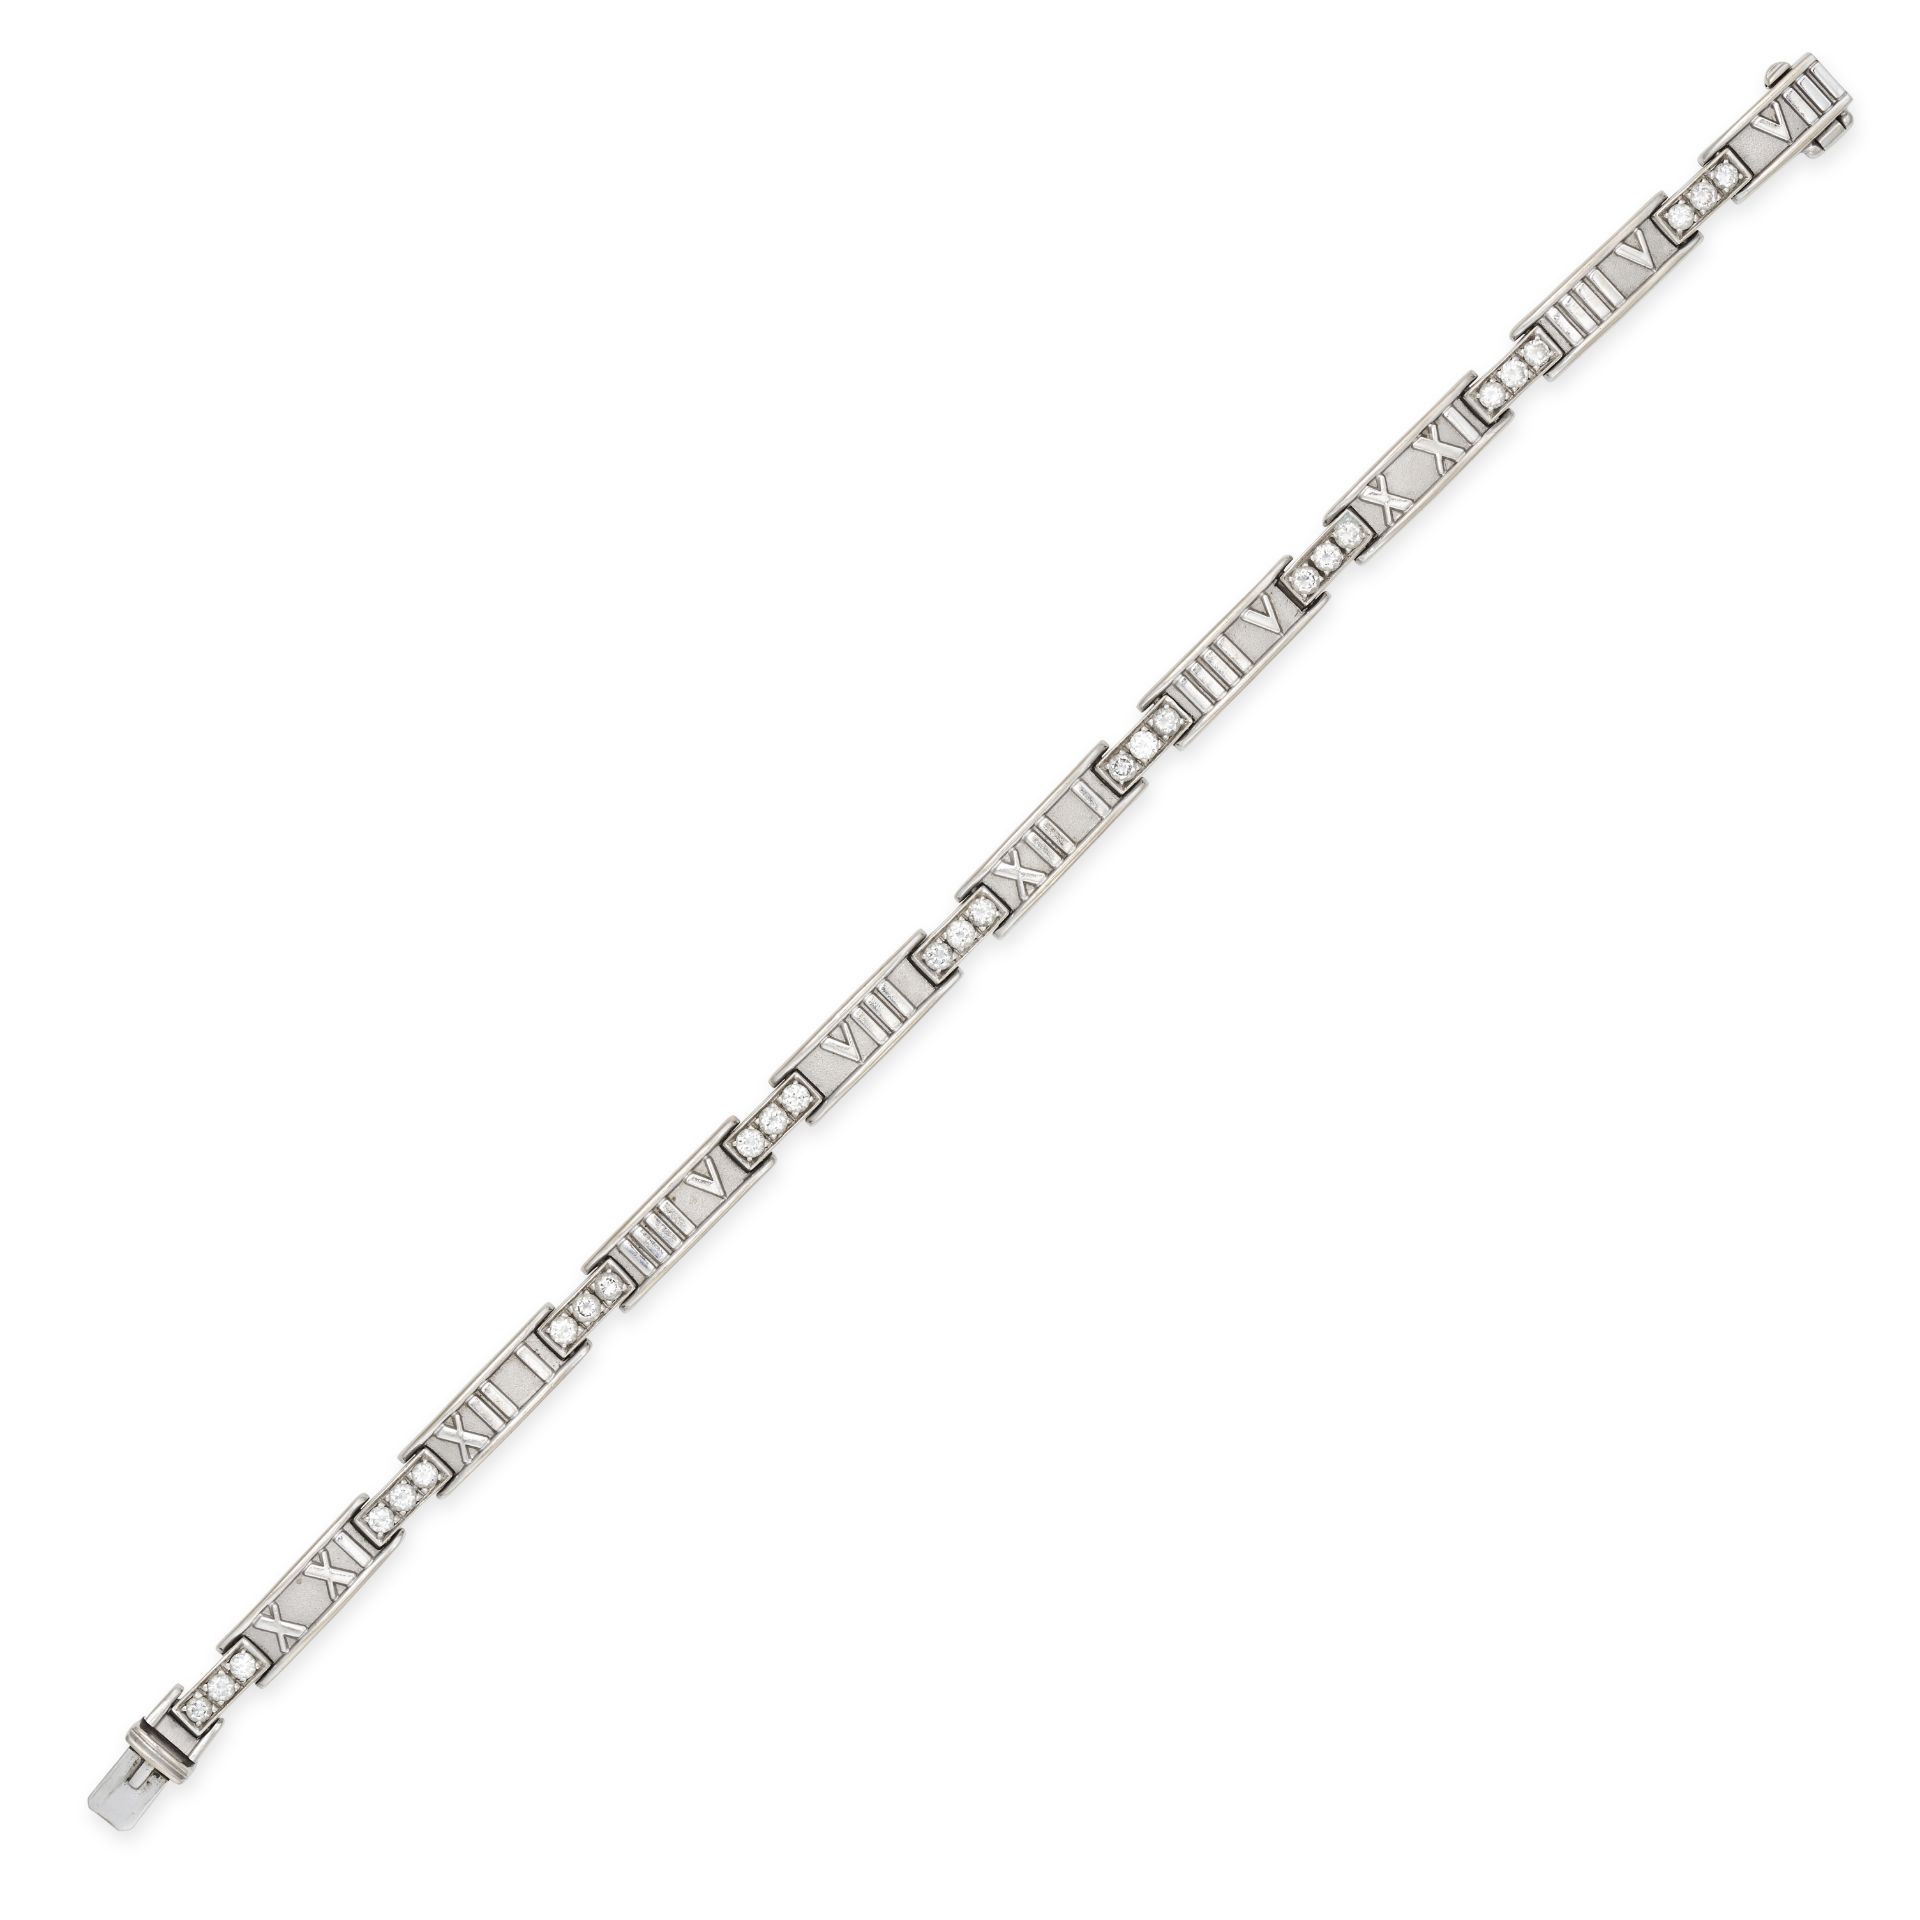 TIFFANY & CO., A DIAMOND ATLAS BRACELET in 18ct white gold, comprising a row of links with emboss...